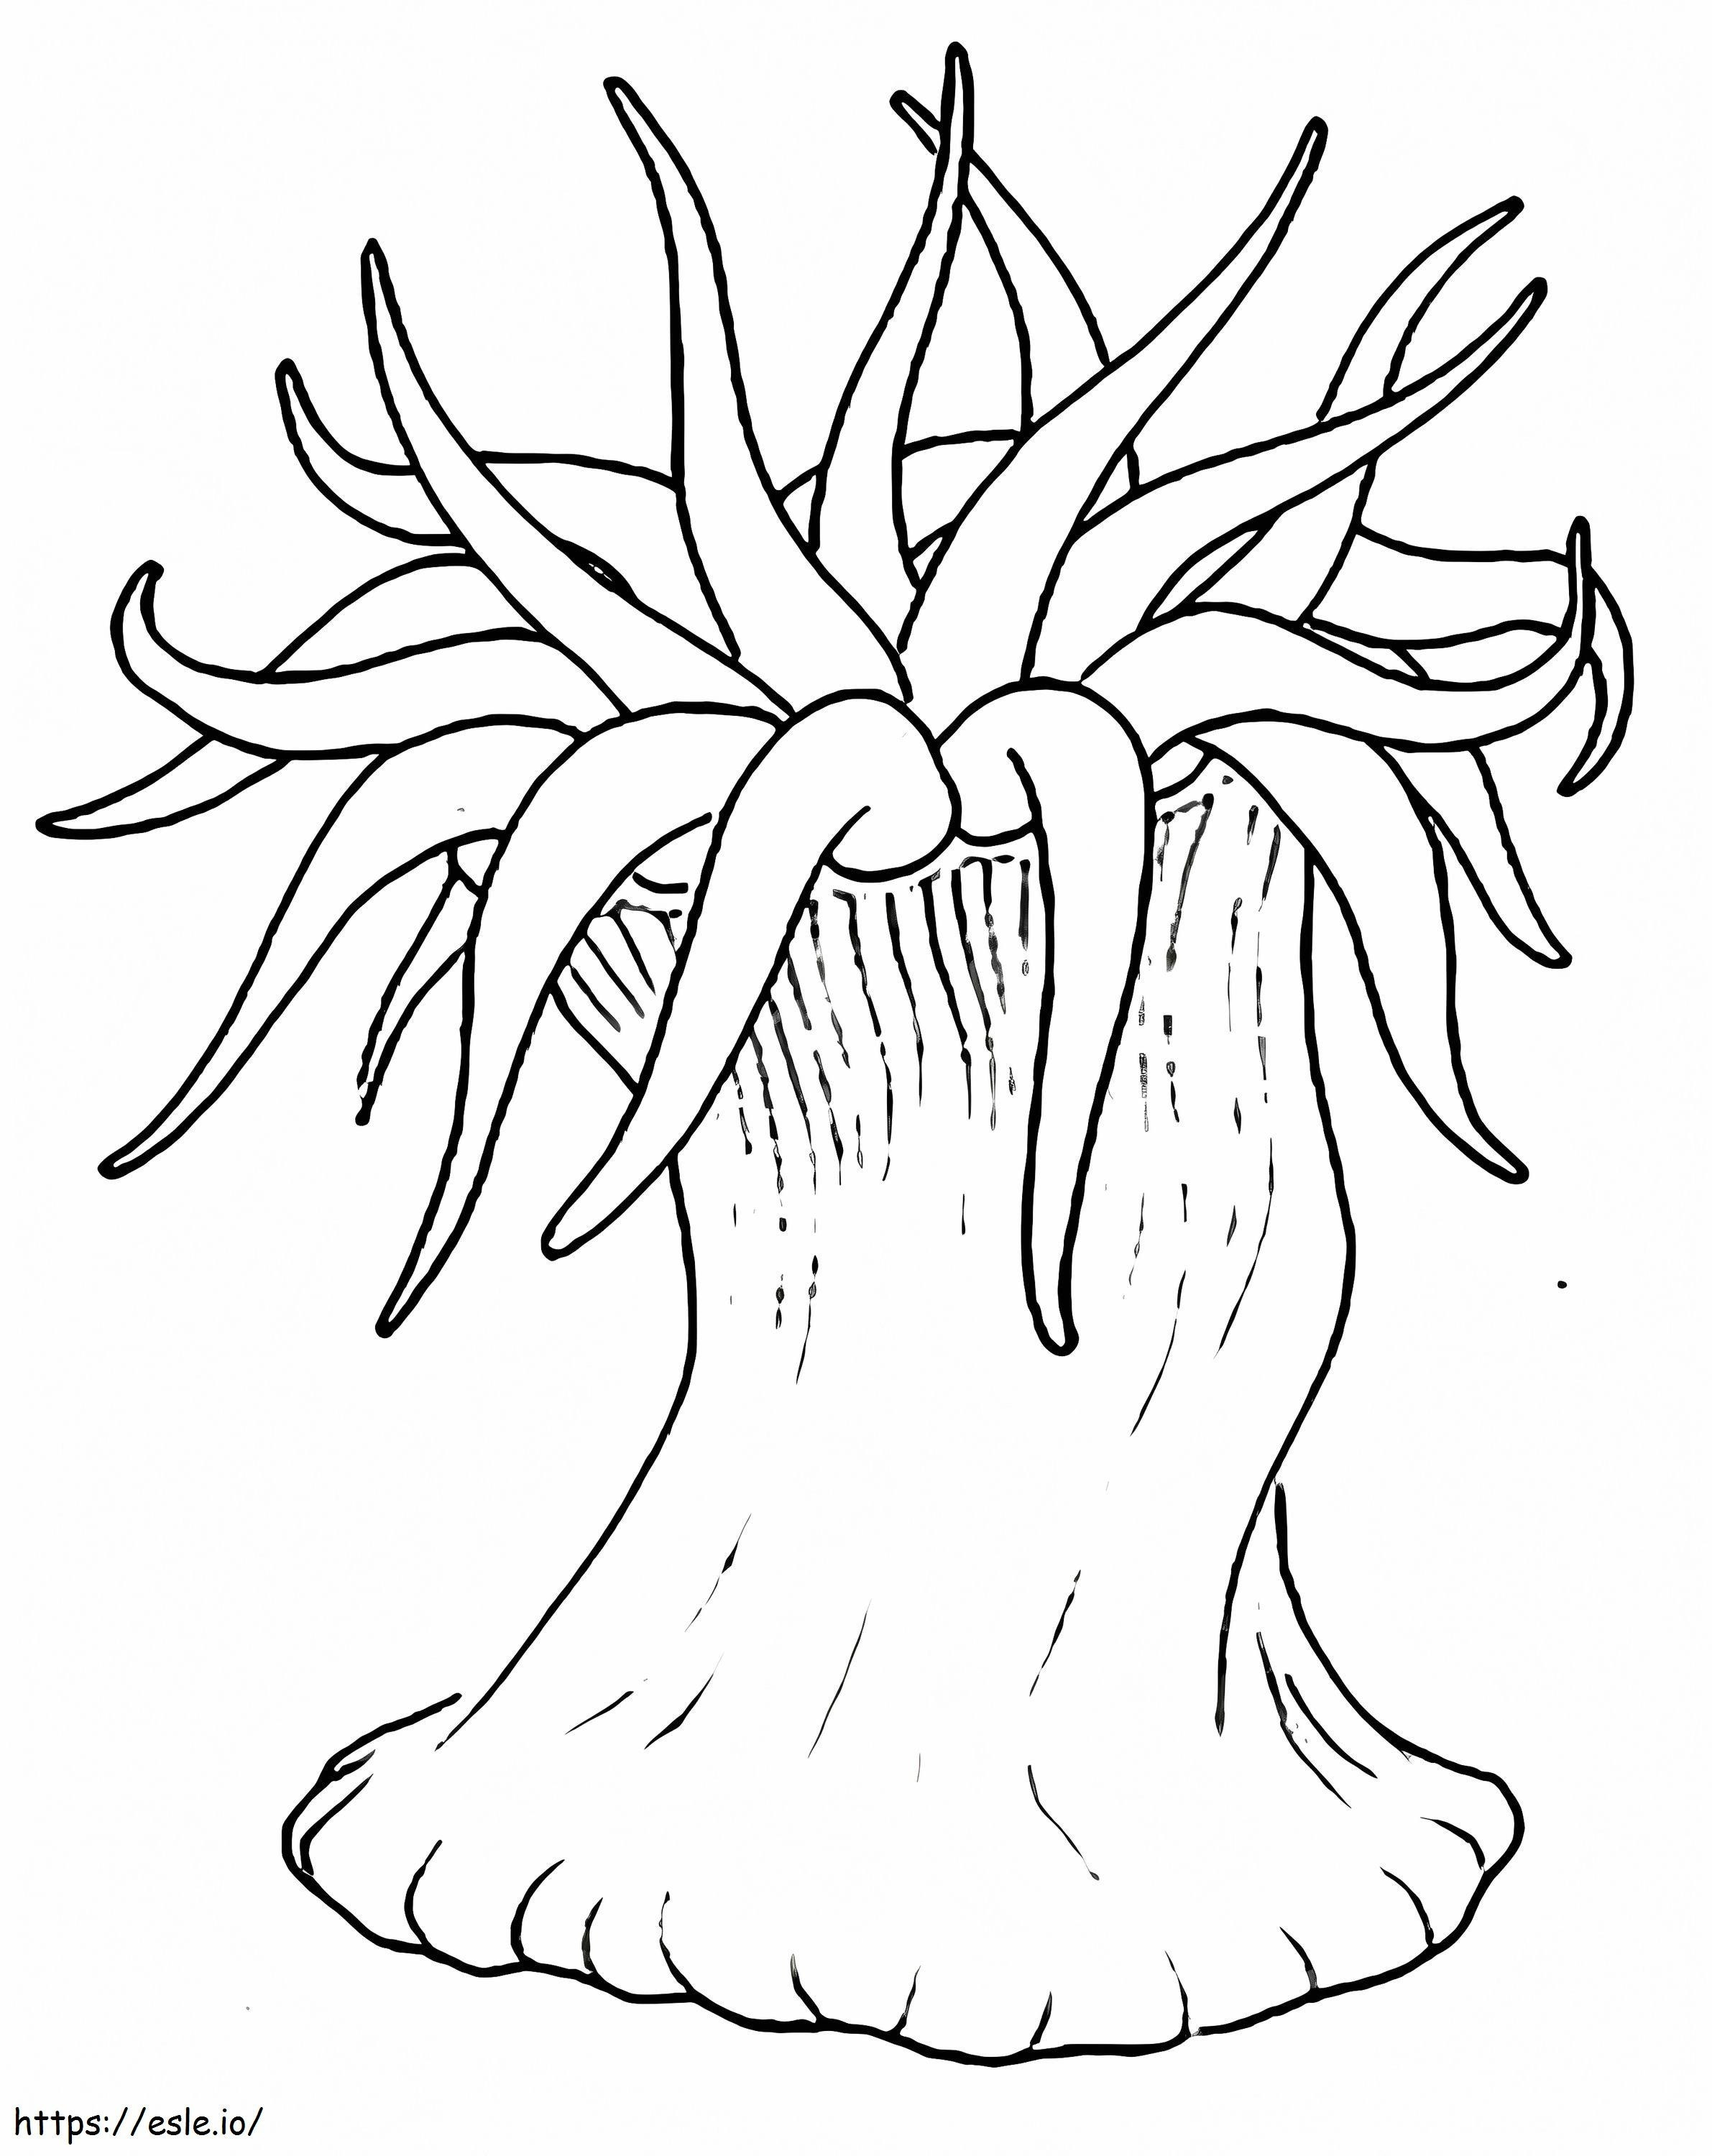 Sea Anemone 3 coloring page